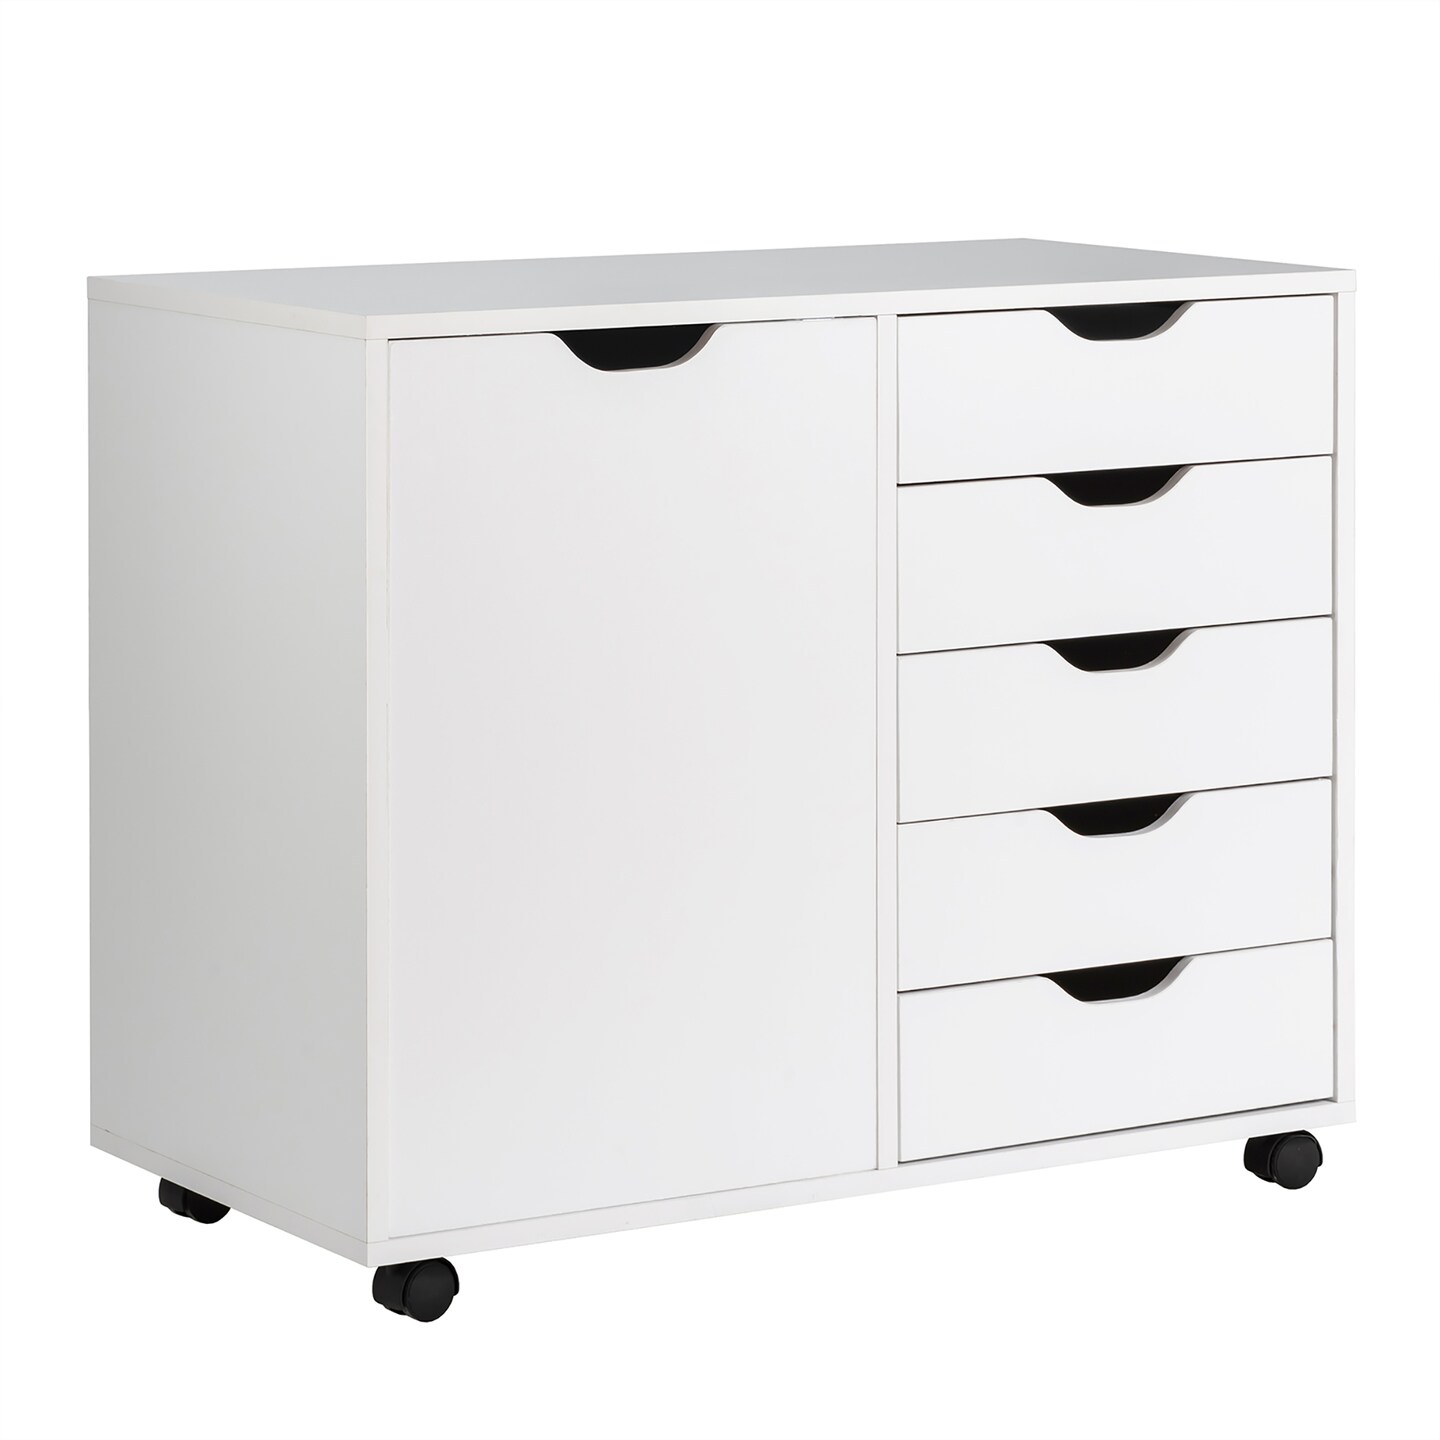 5 Fabric Drawers Dresser with Metal Frame and Wooden Top - Costway